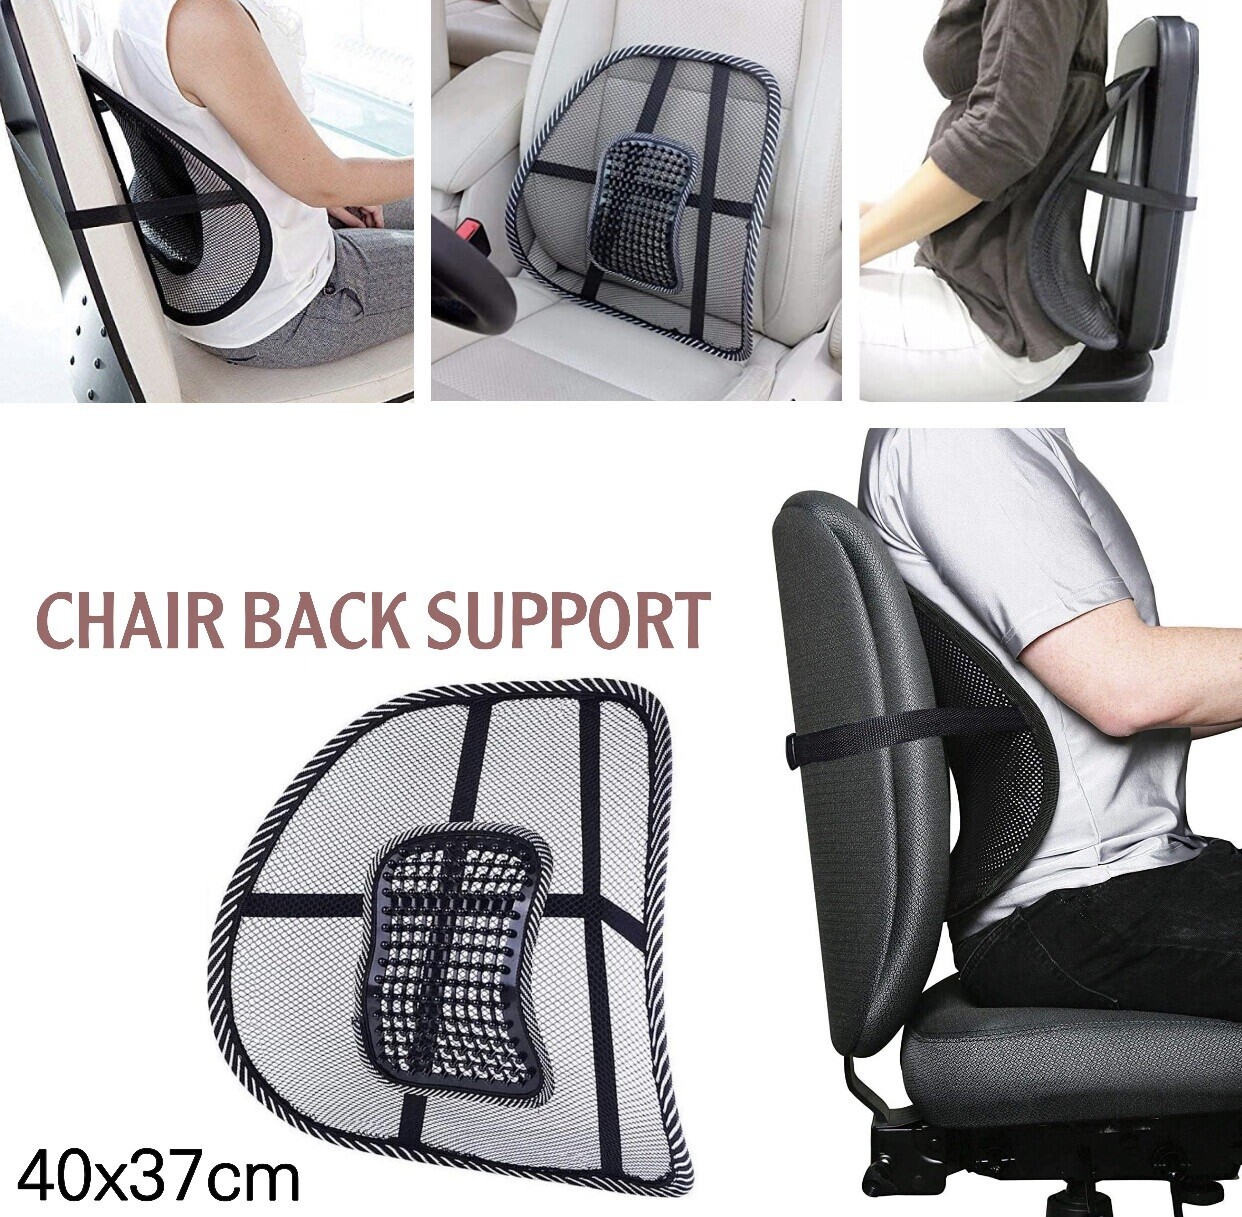 Chair Back Support